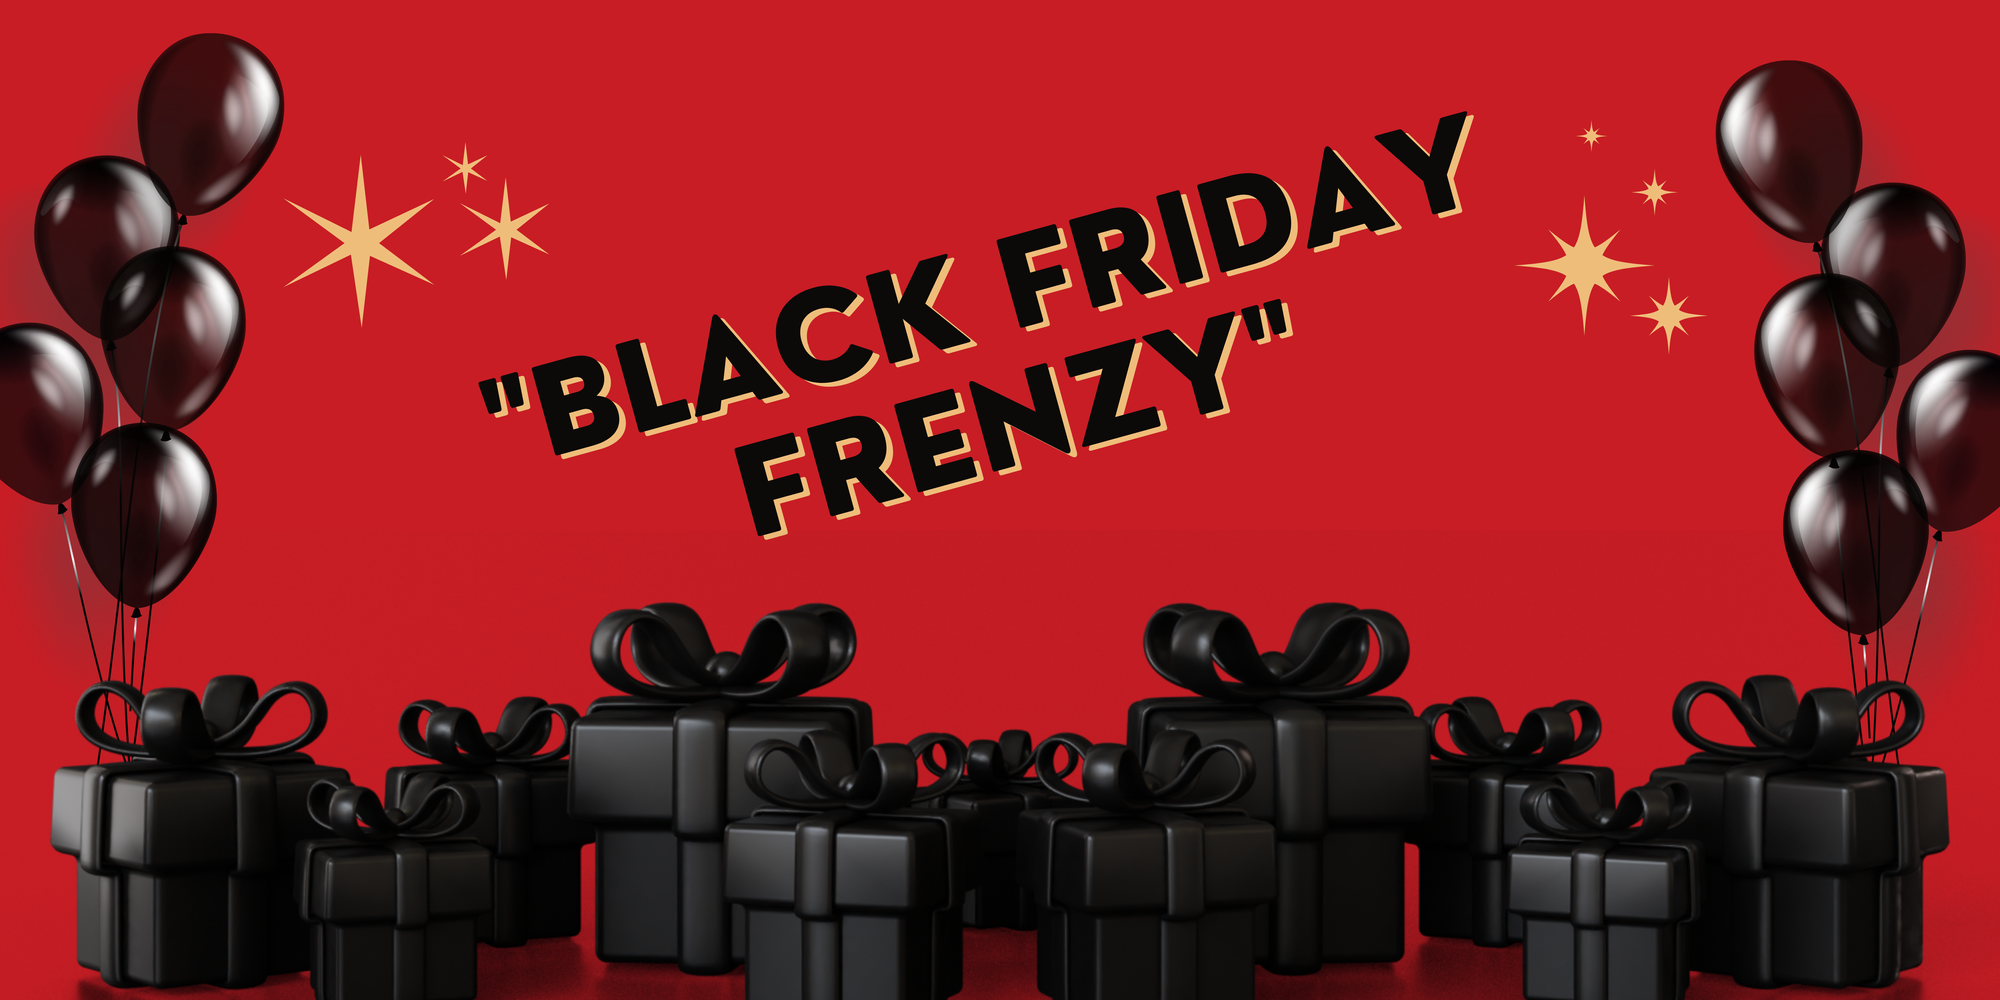 Black Friday: 15 Facts that will blow your mind